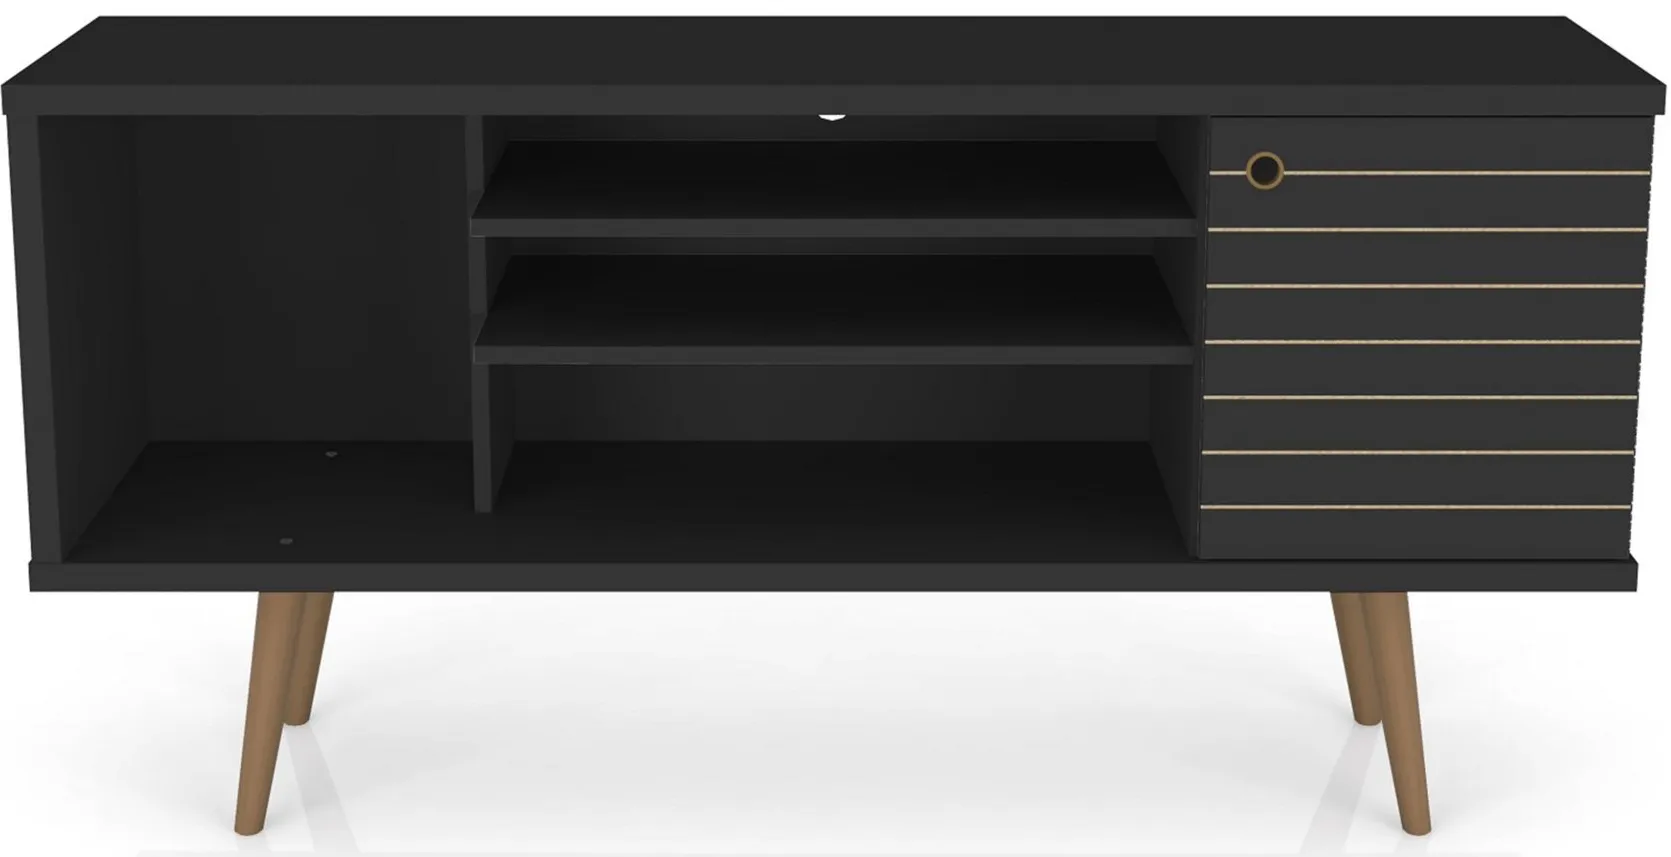 Liberty 53" TV Stand in Black by Manhattan Comfort